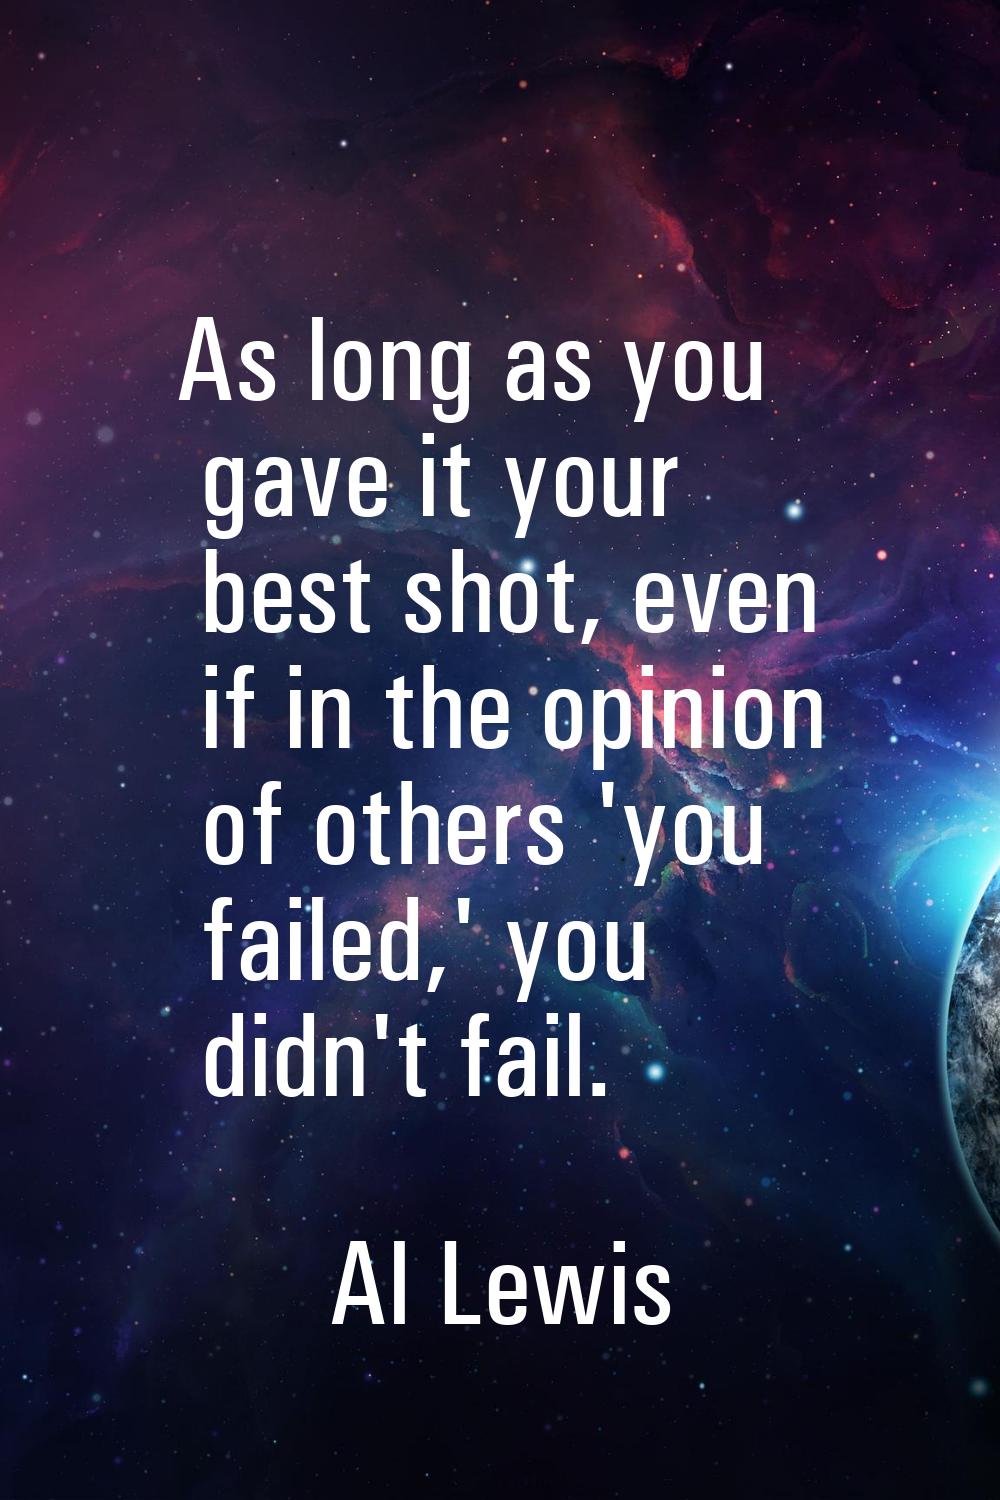 As long as you gave it your best shot, even if in the opinion of others 'you failed,' you didn't fa